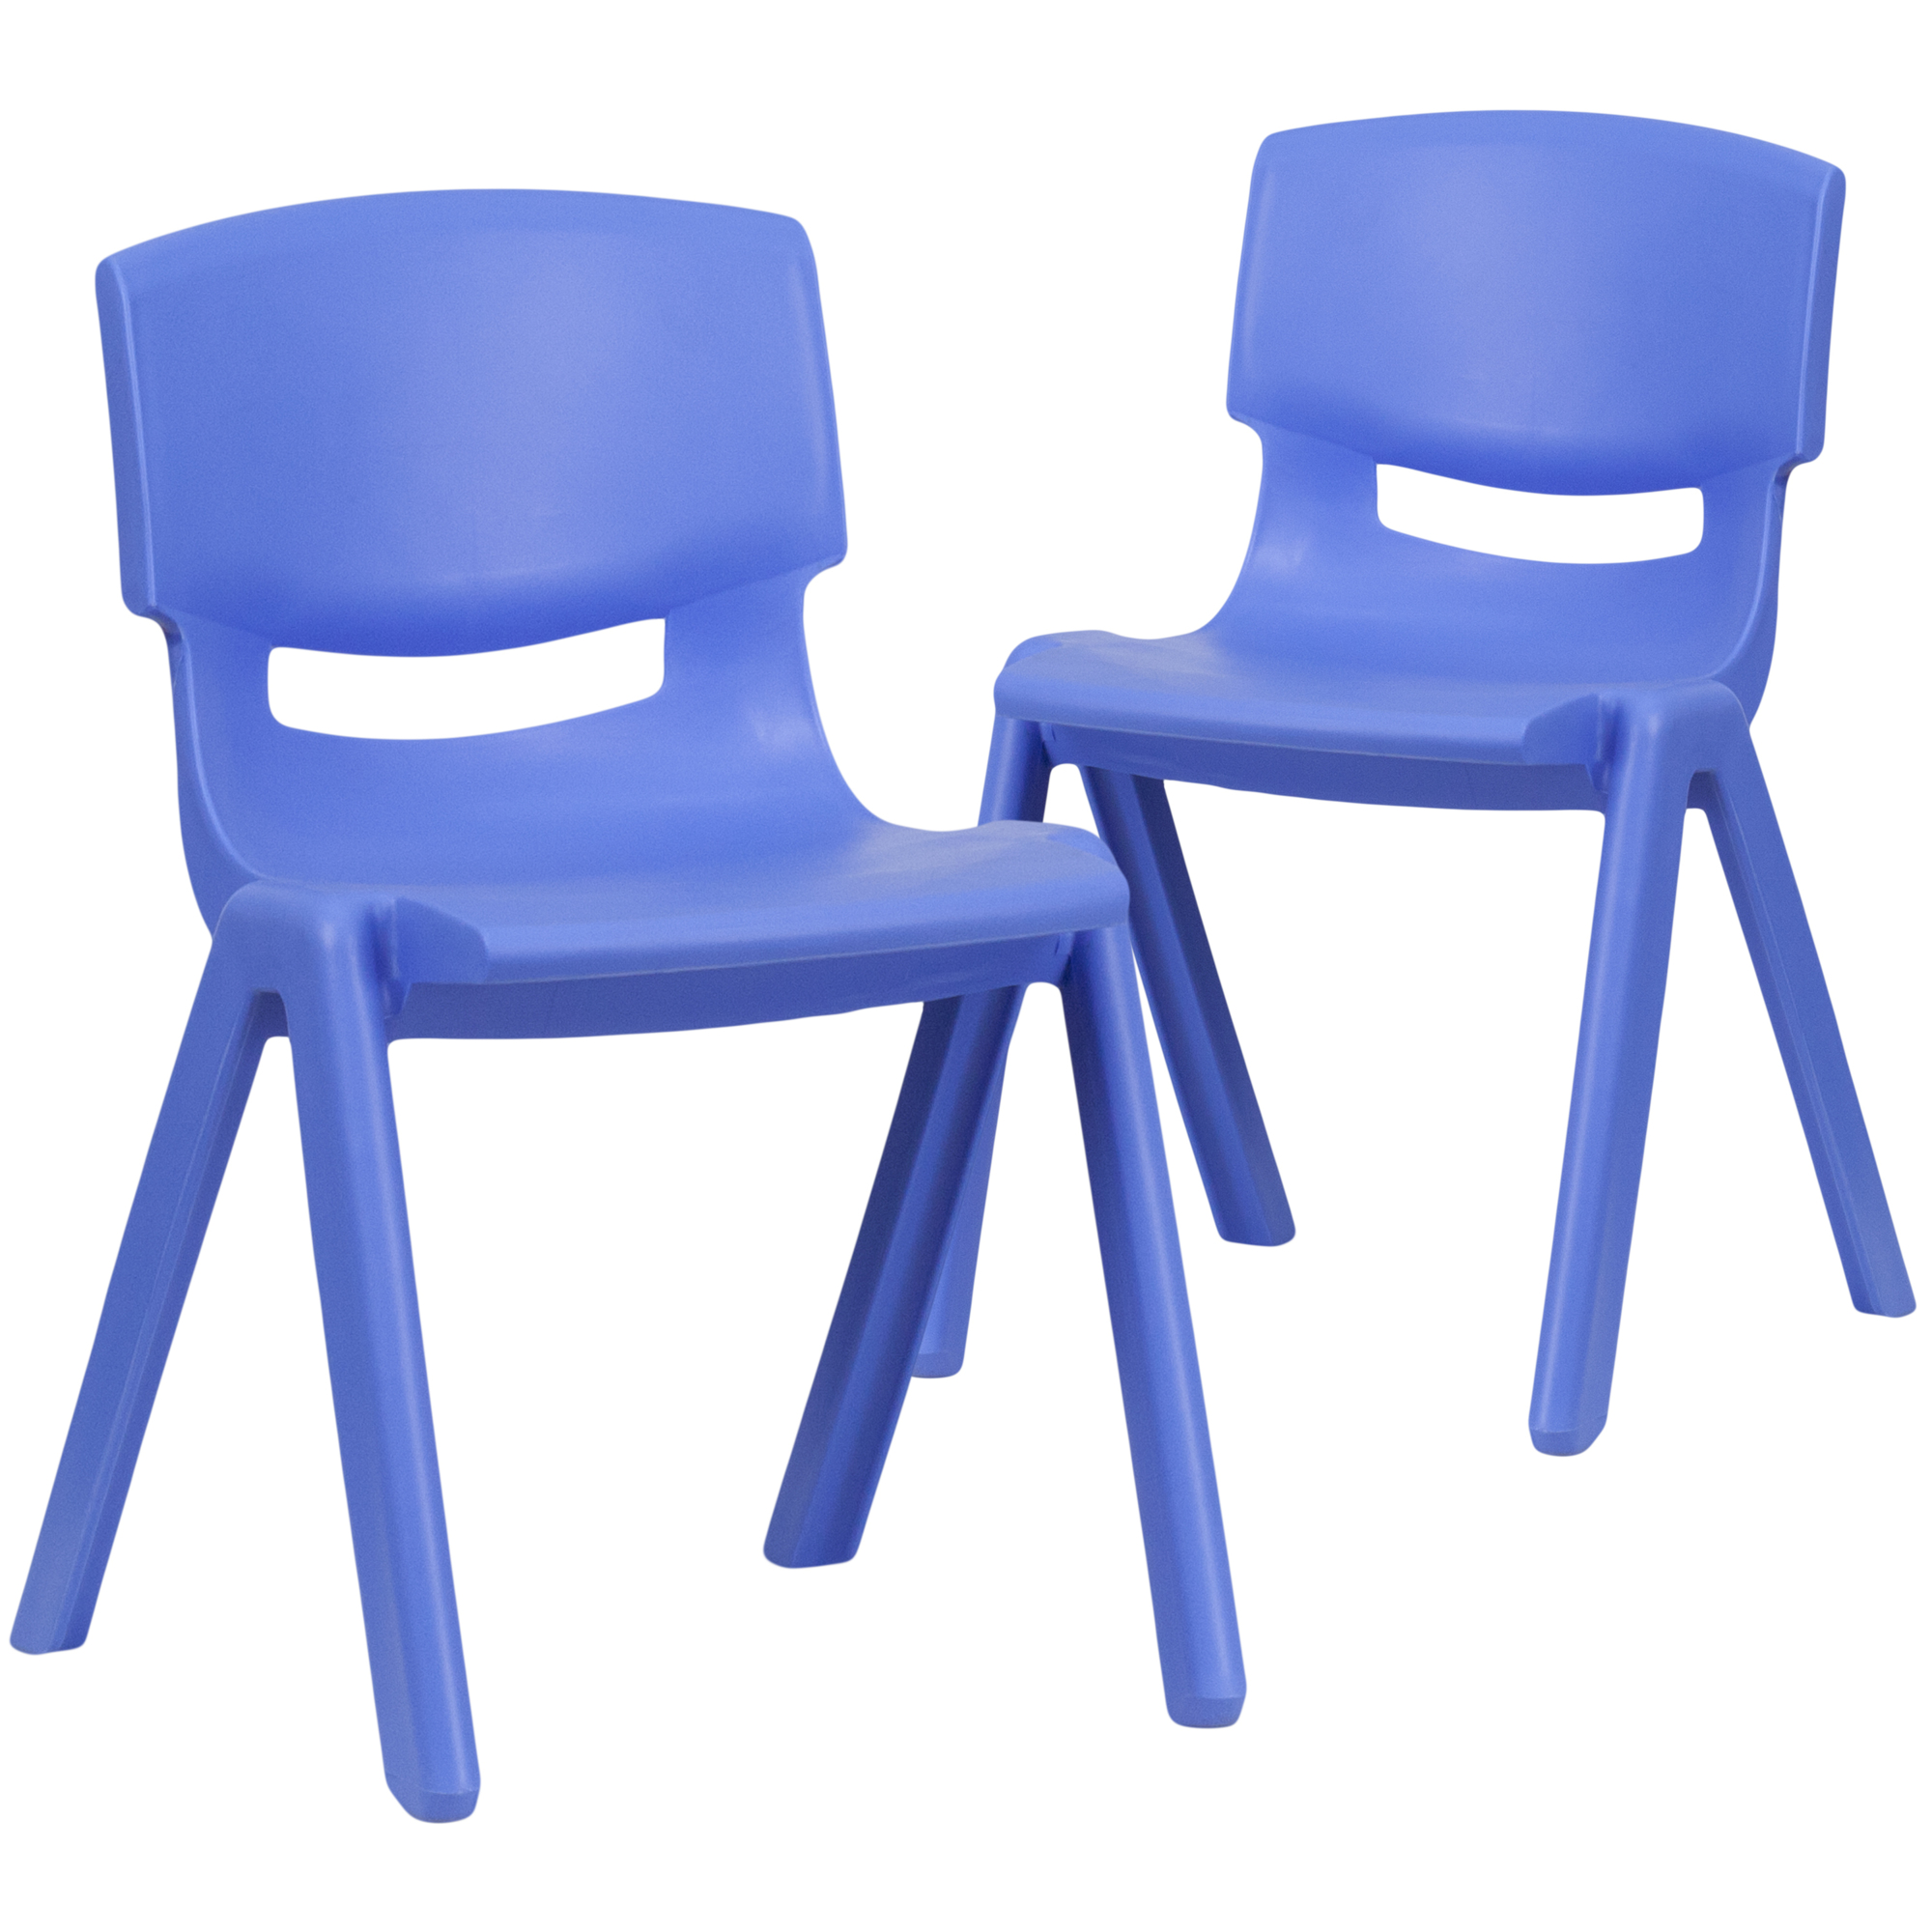 Flash Furniture, 2 Pack Blue Plastic School Chair-13.25Inch H Seat, Primary Color Blue, Included (qty.) 2, Model 2YUYCX004BLUE